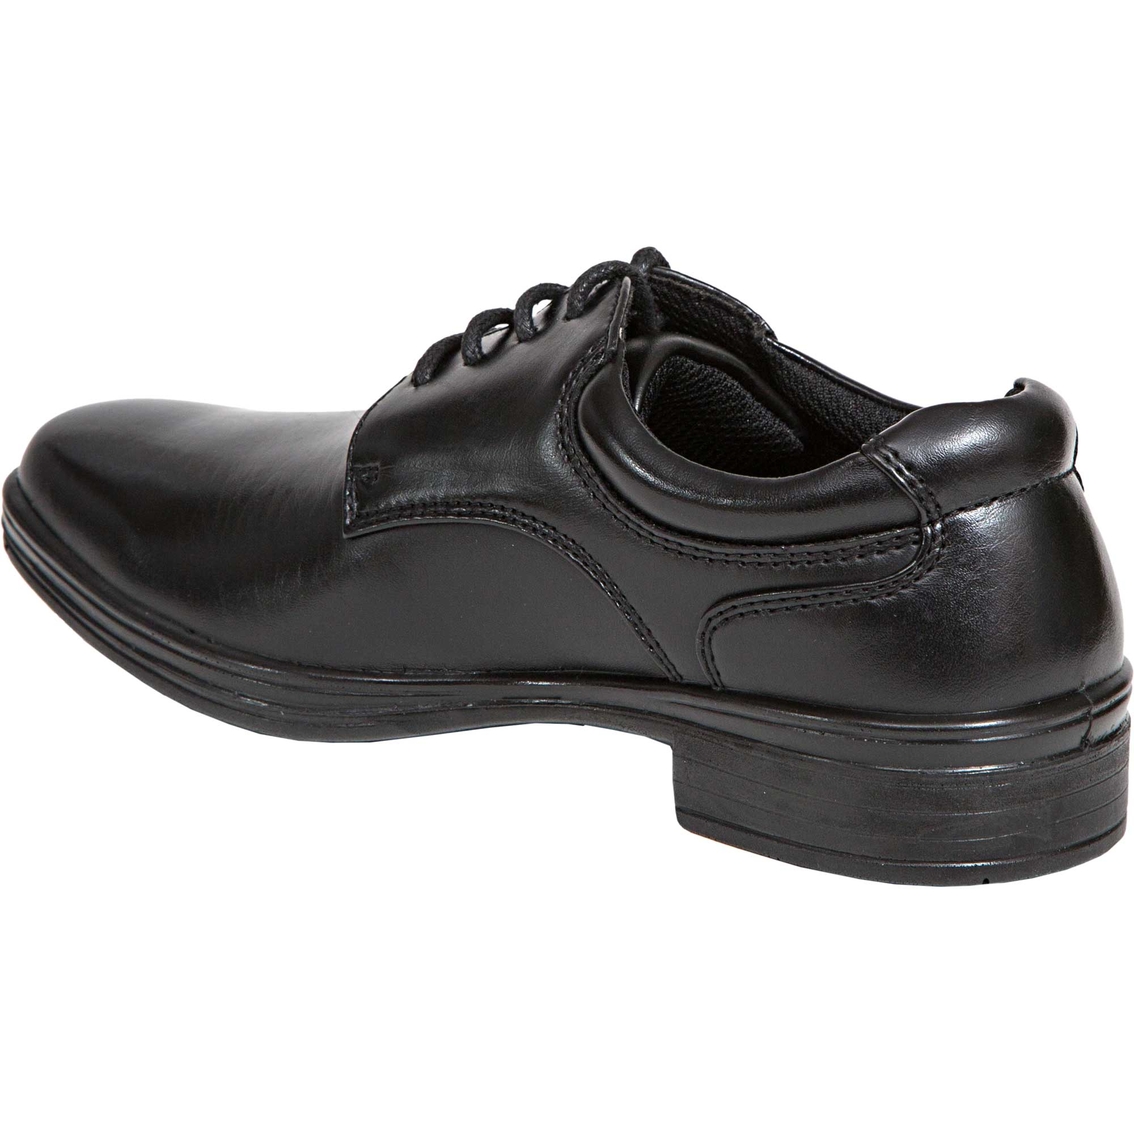 Deer Stags Grade School Boys Blazing Lace Up Oxford Shoes - Image 8 of 8